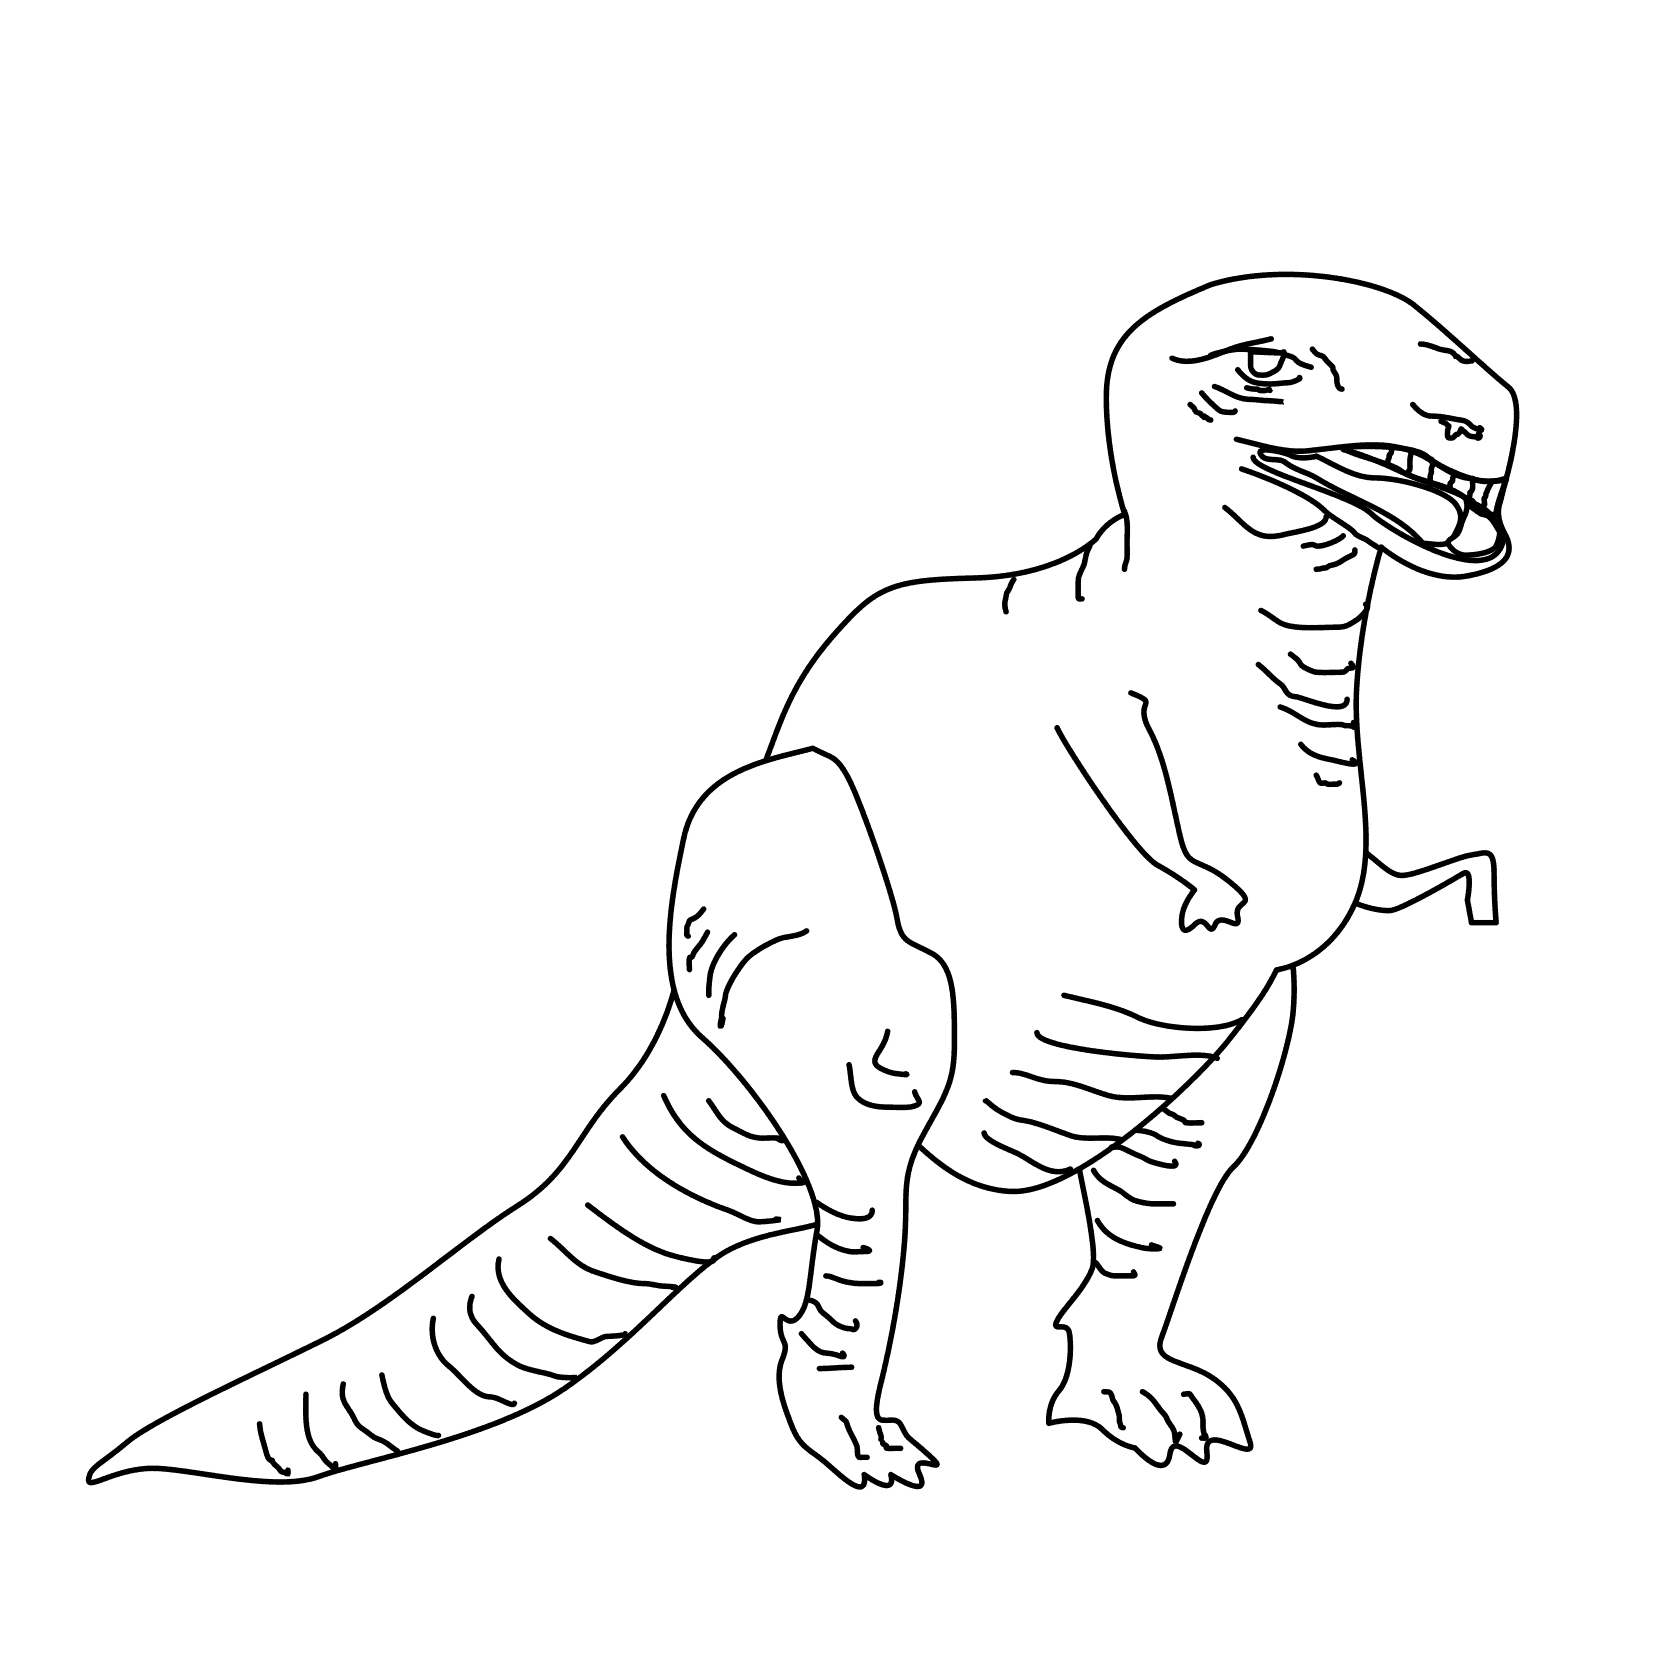 dinosaur-colouring-pages-free-printables